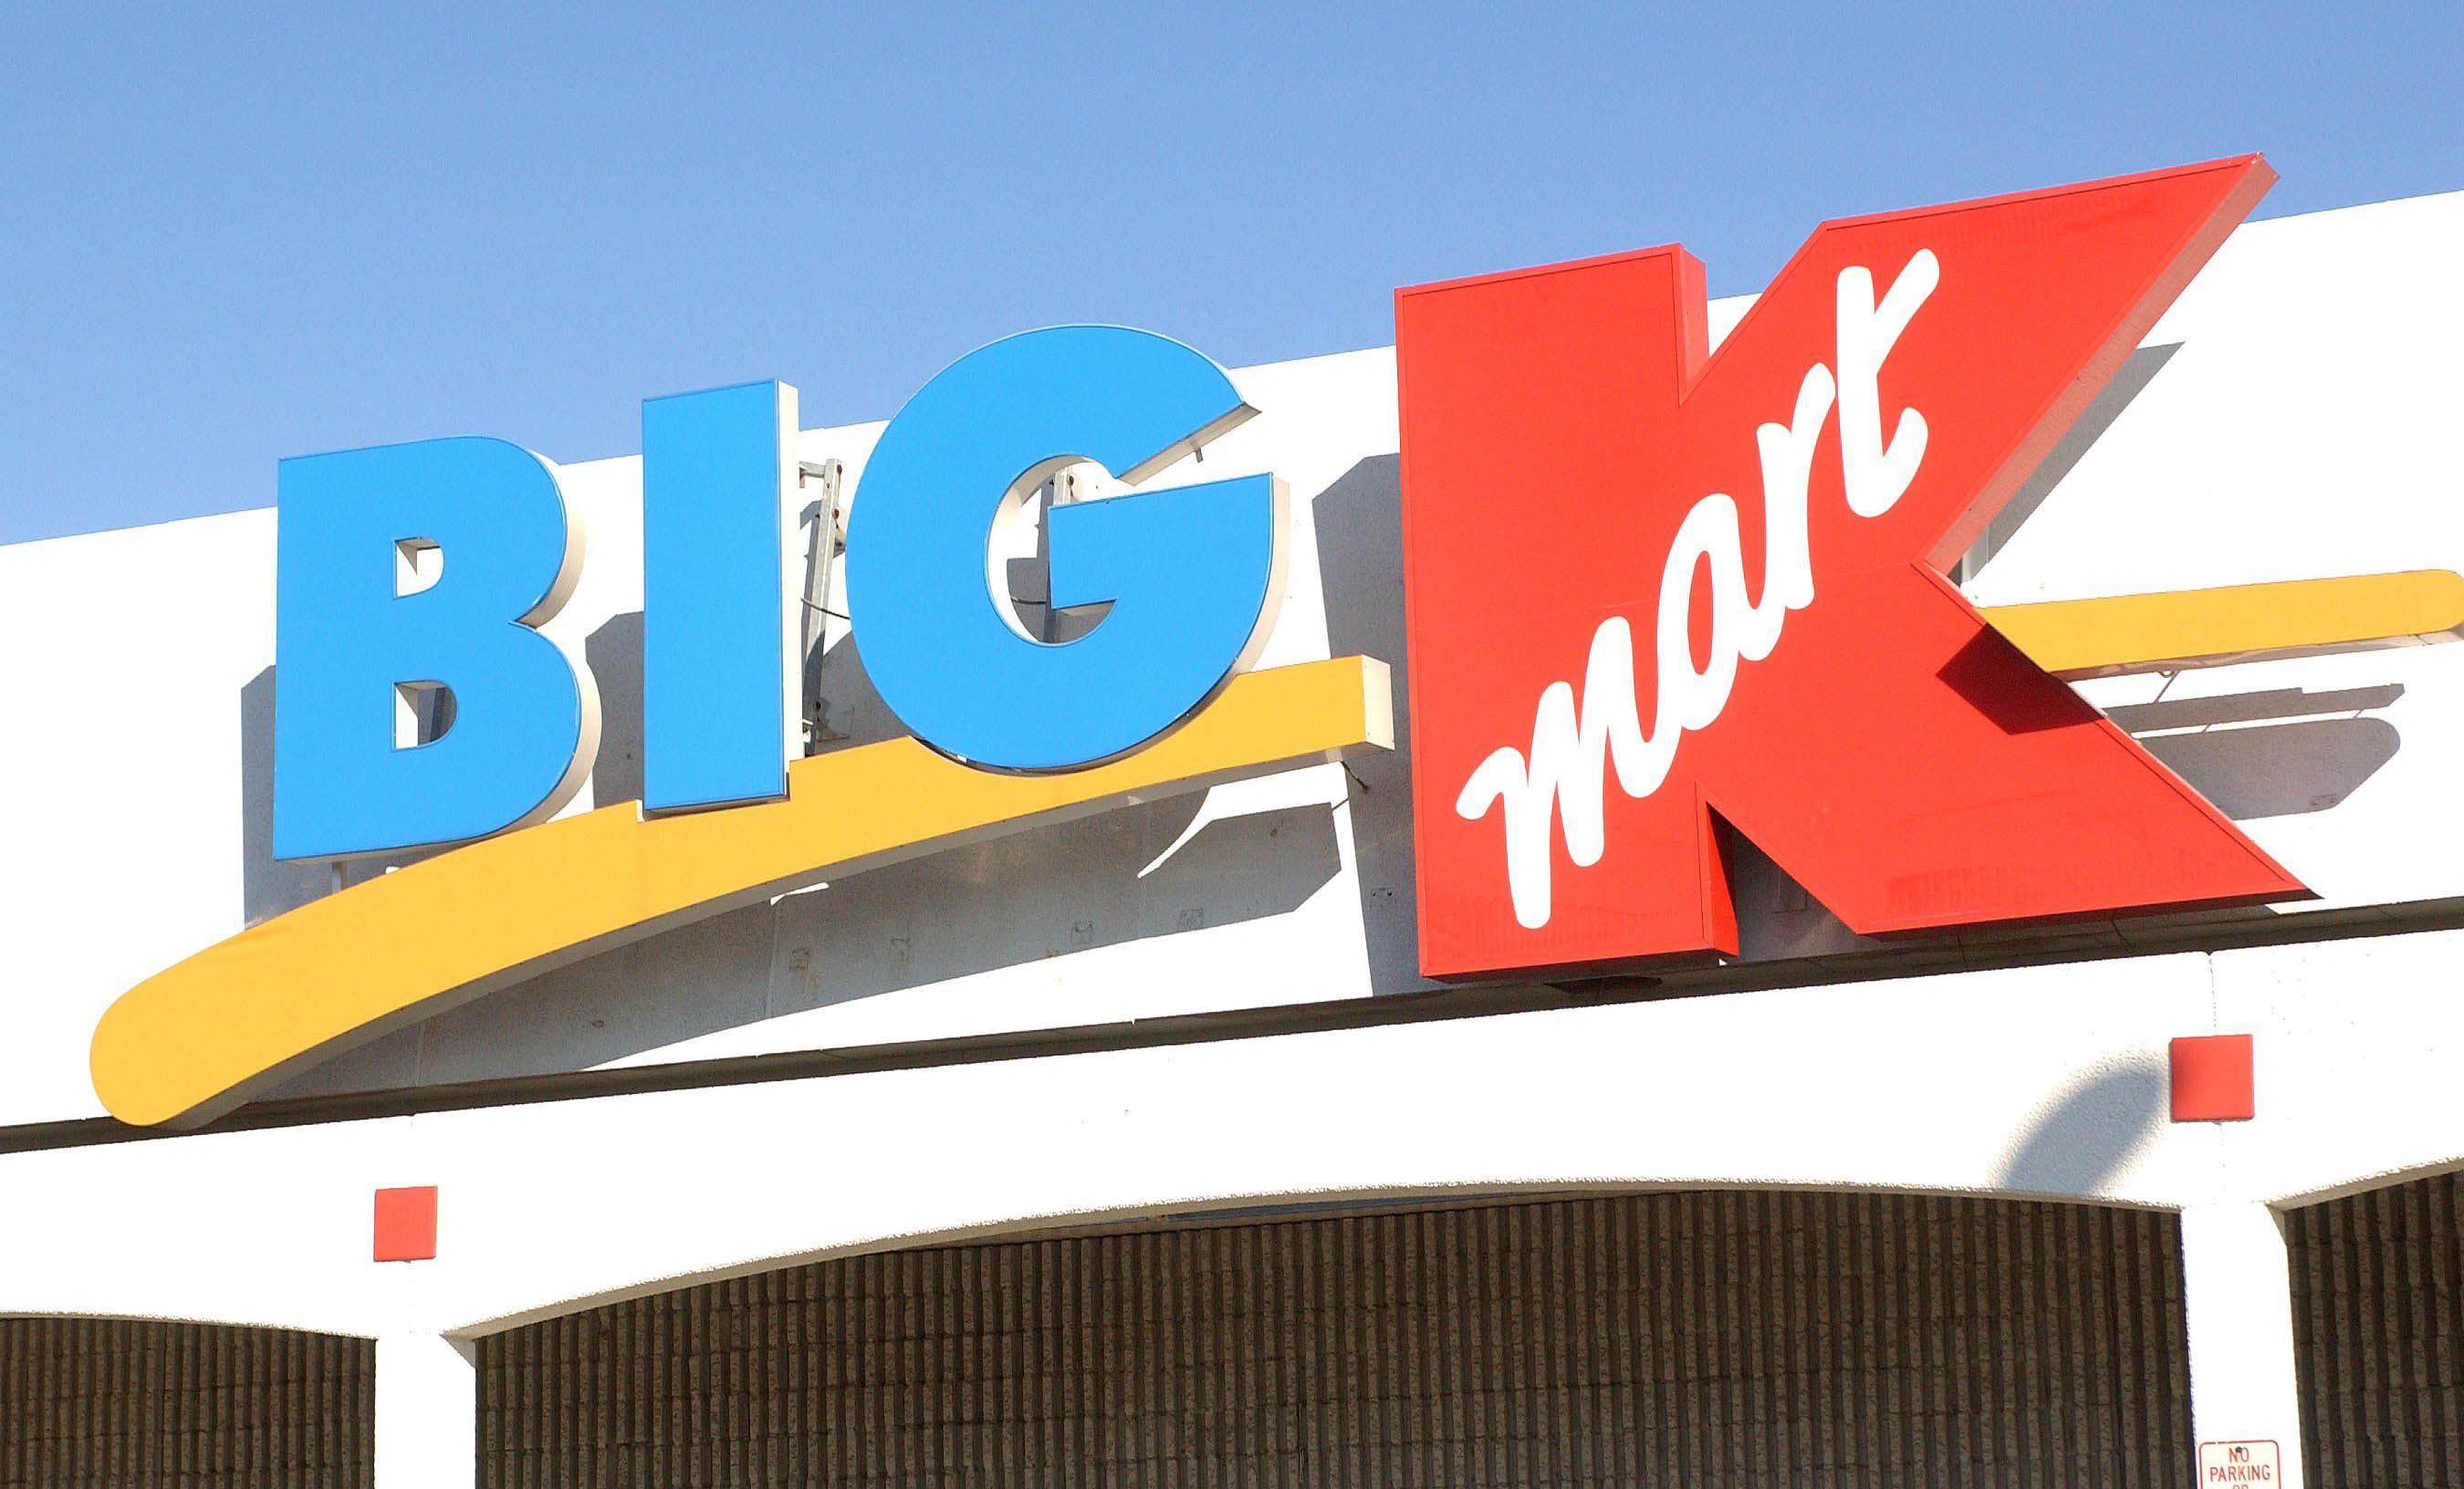 Kmart to close Hampton store by early August – Daily Press